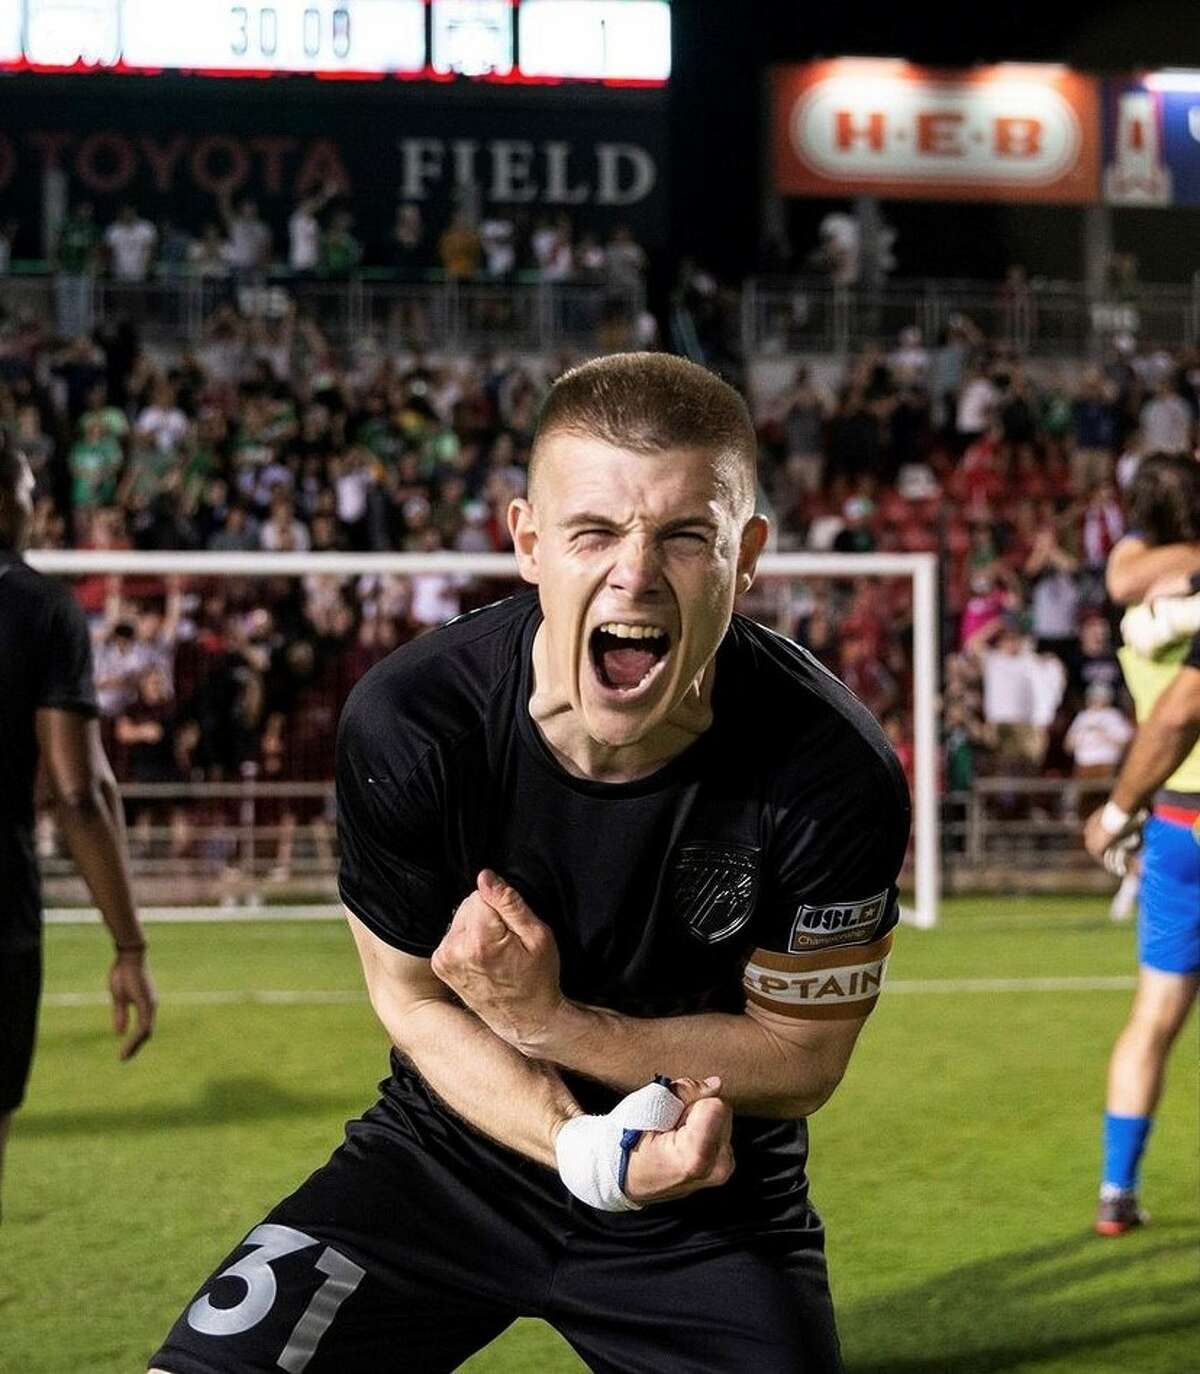 What's been driving San Antonio FC's record-breaking success this season? Their Mentality Monster mindset